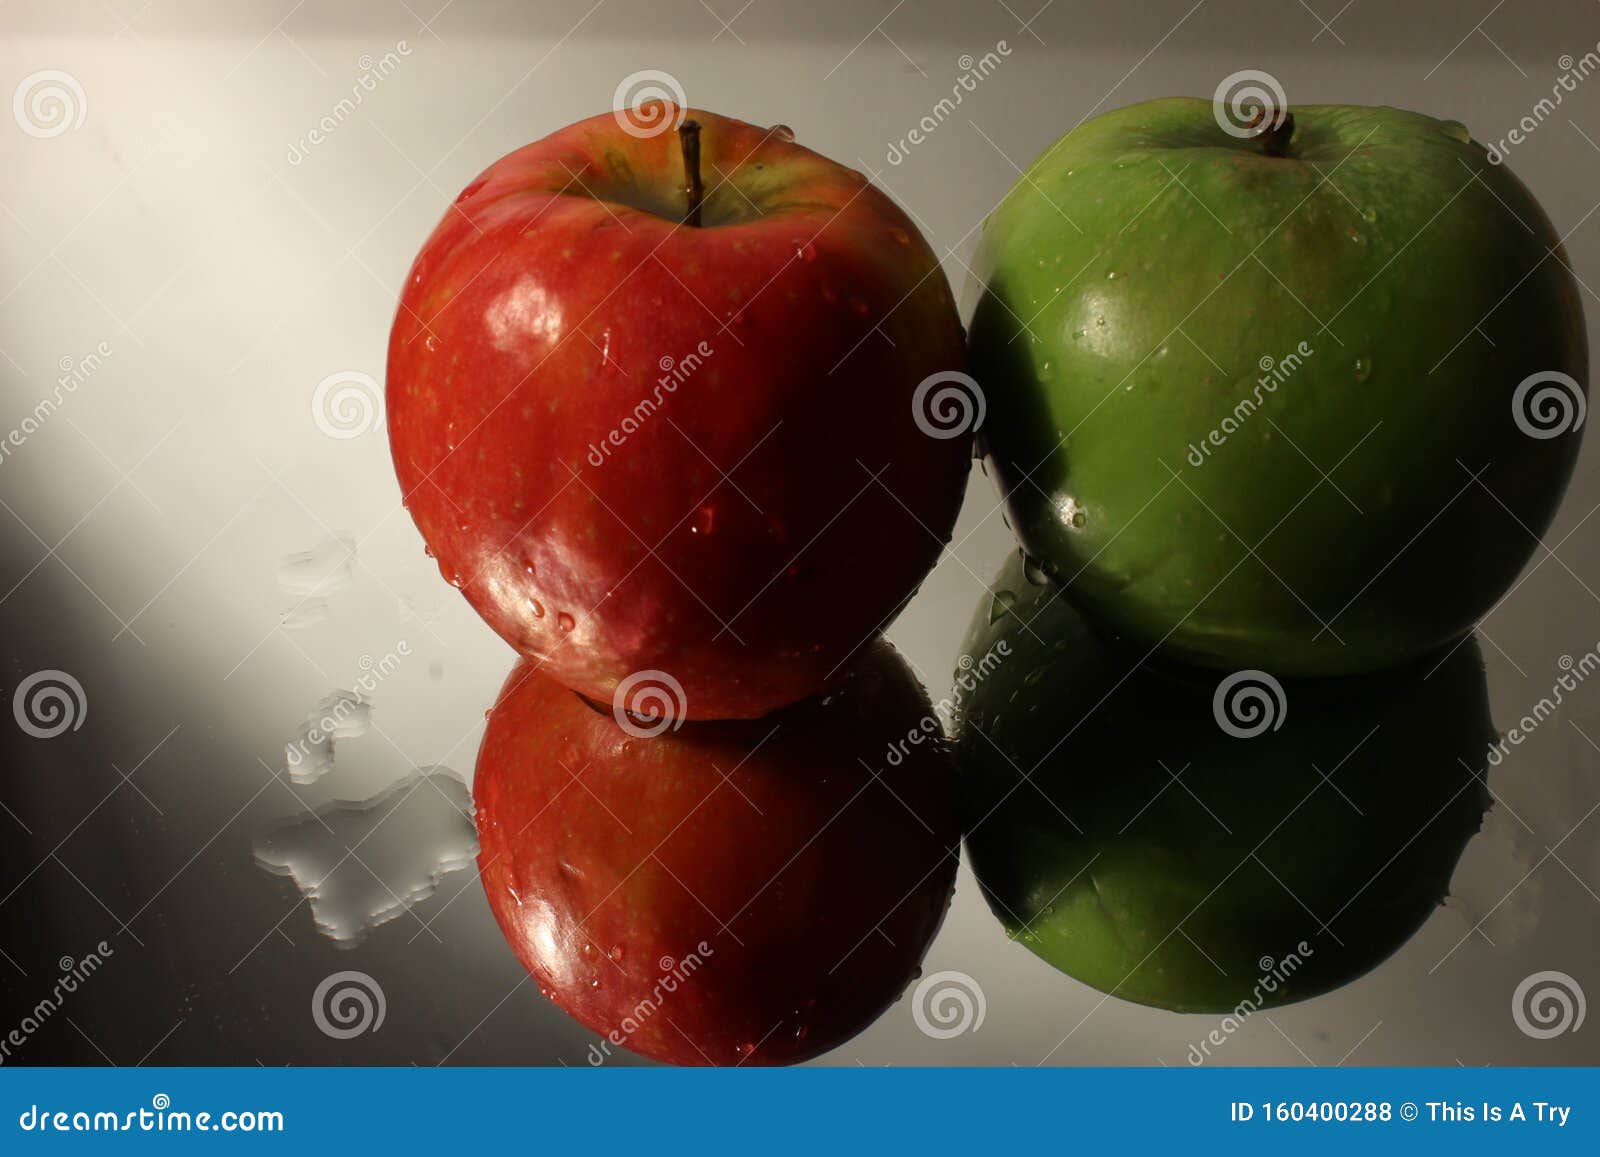 two reflected apples & water with applying rule of thirds